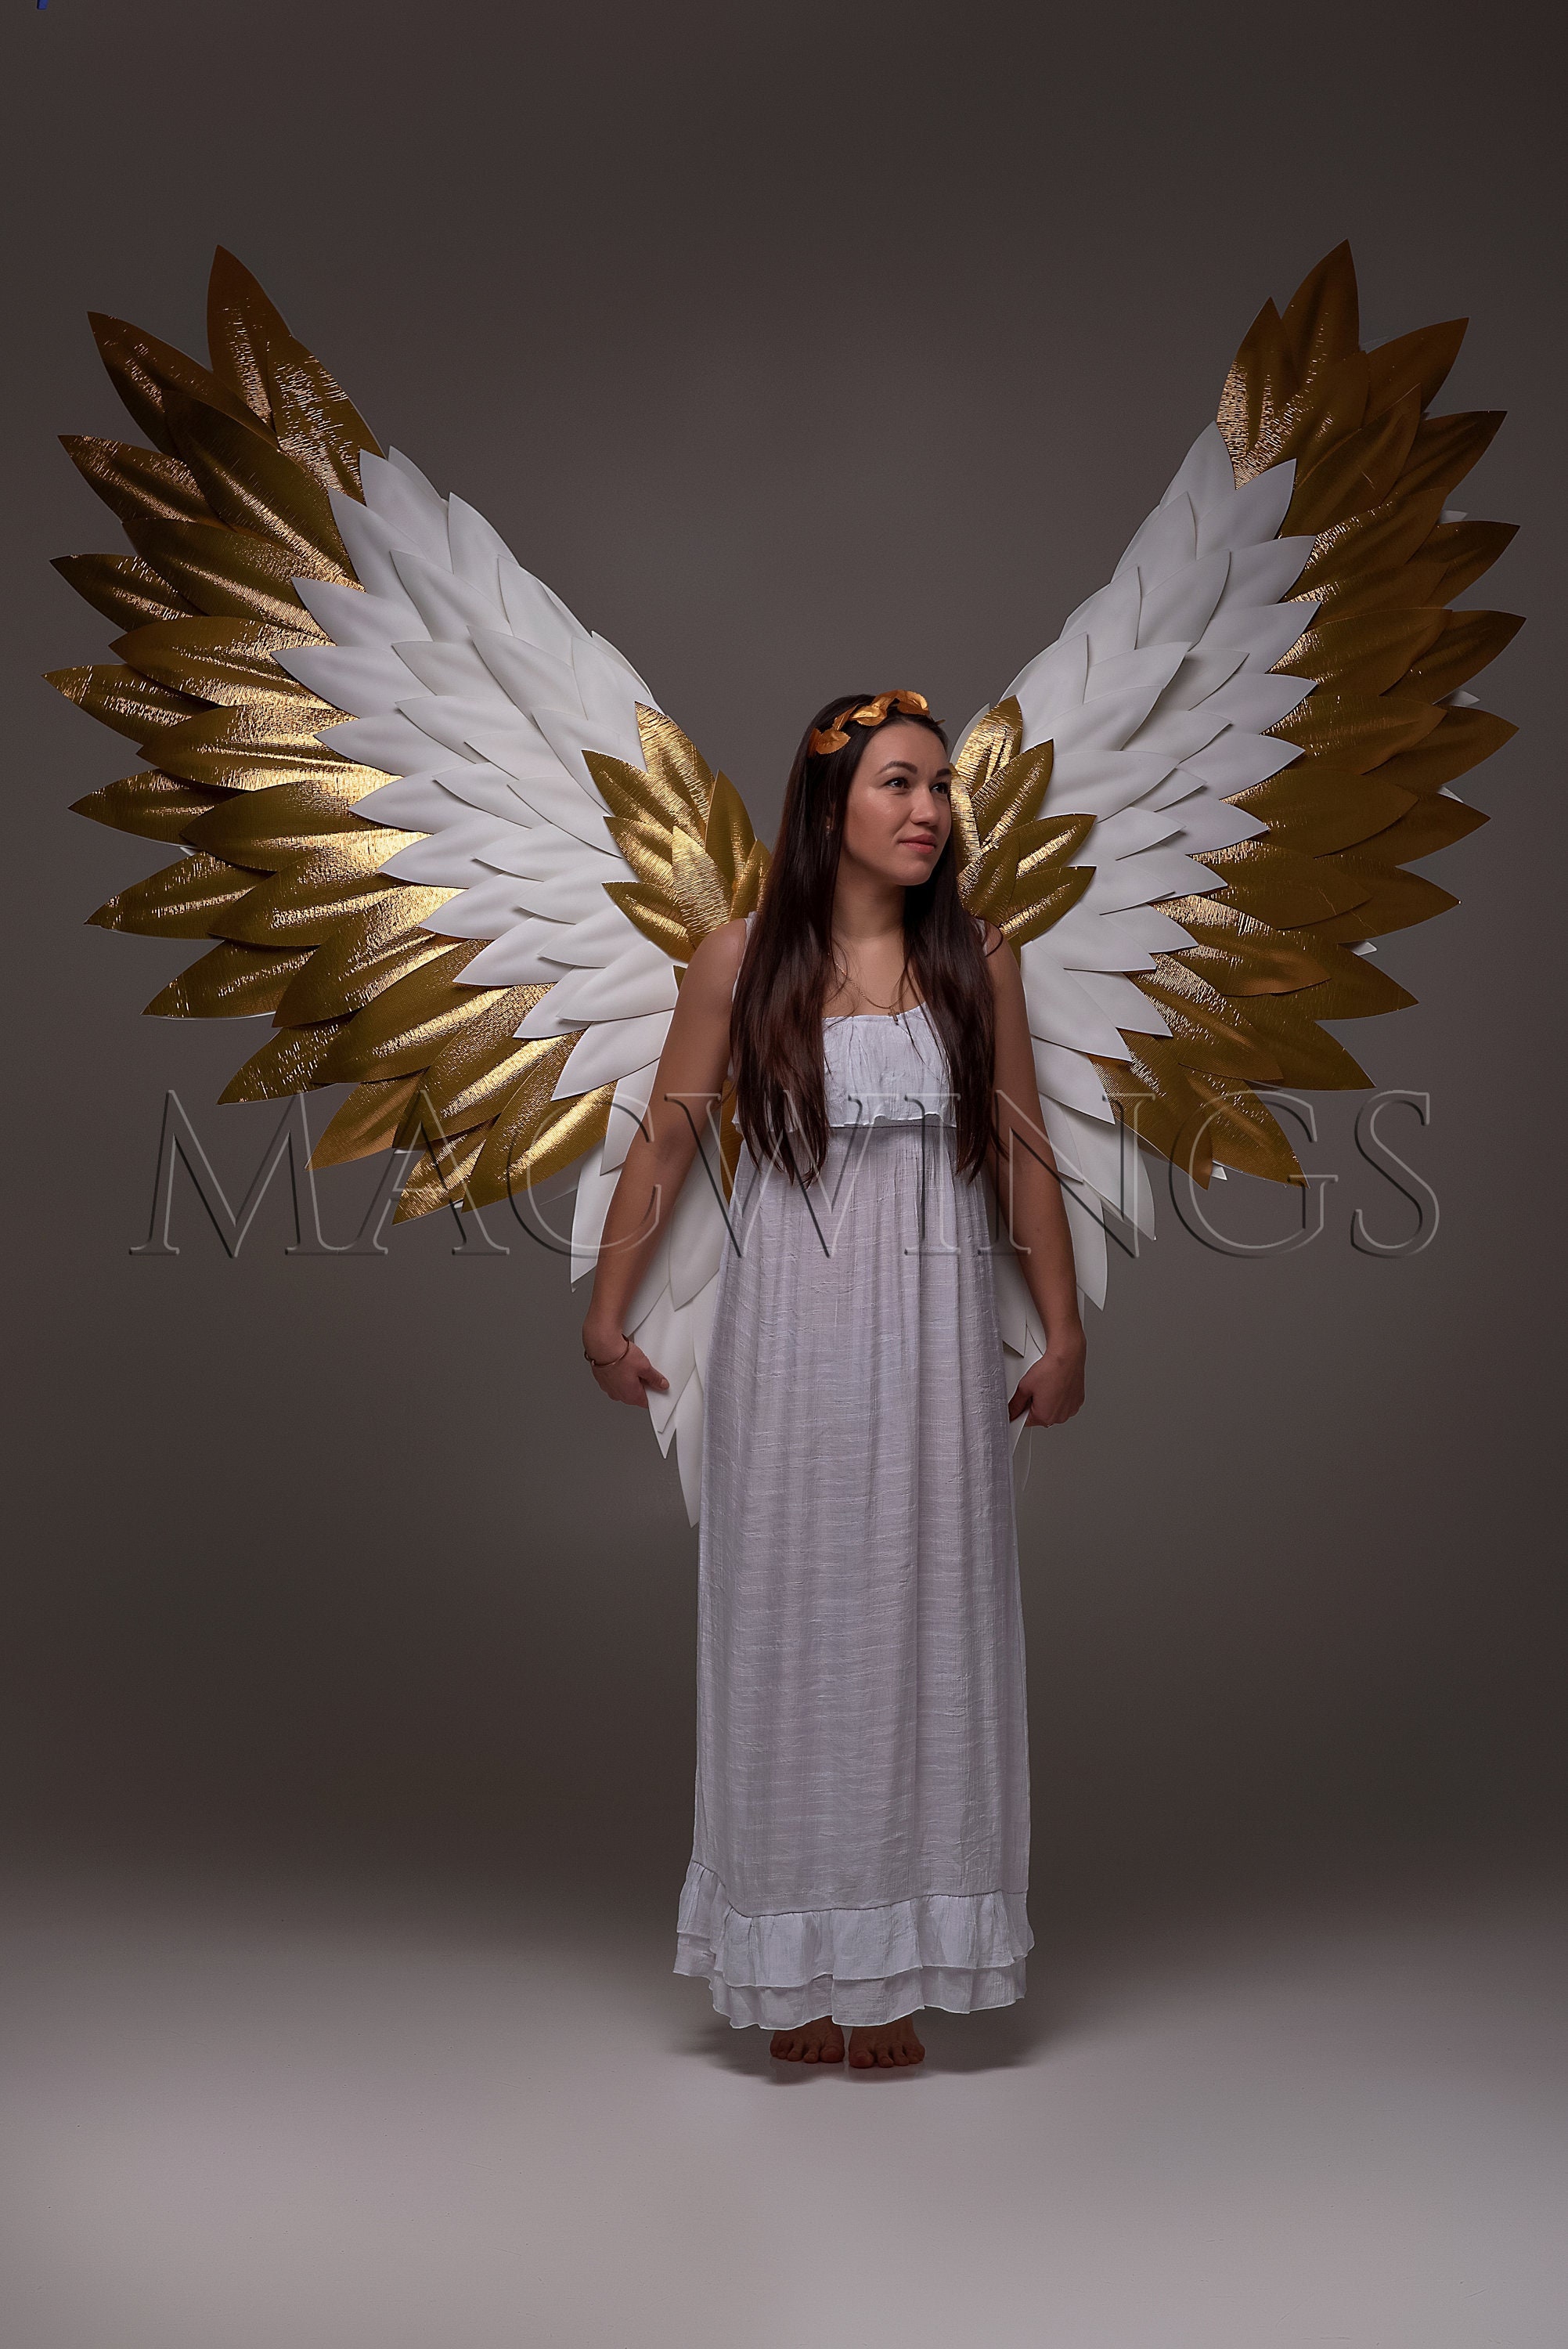 Buy White and Gold Wings, Large Wings, Angel Wings Costume Cosplay, Cupid  Wings, Gold Tips, Adult Wings Photo Prop Woman, Adult Angel Costume Online  in India 